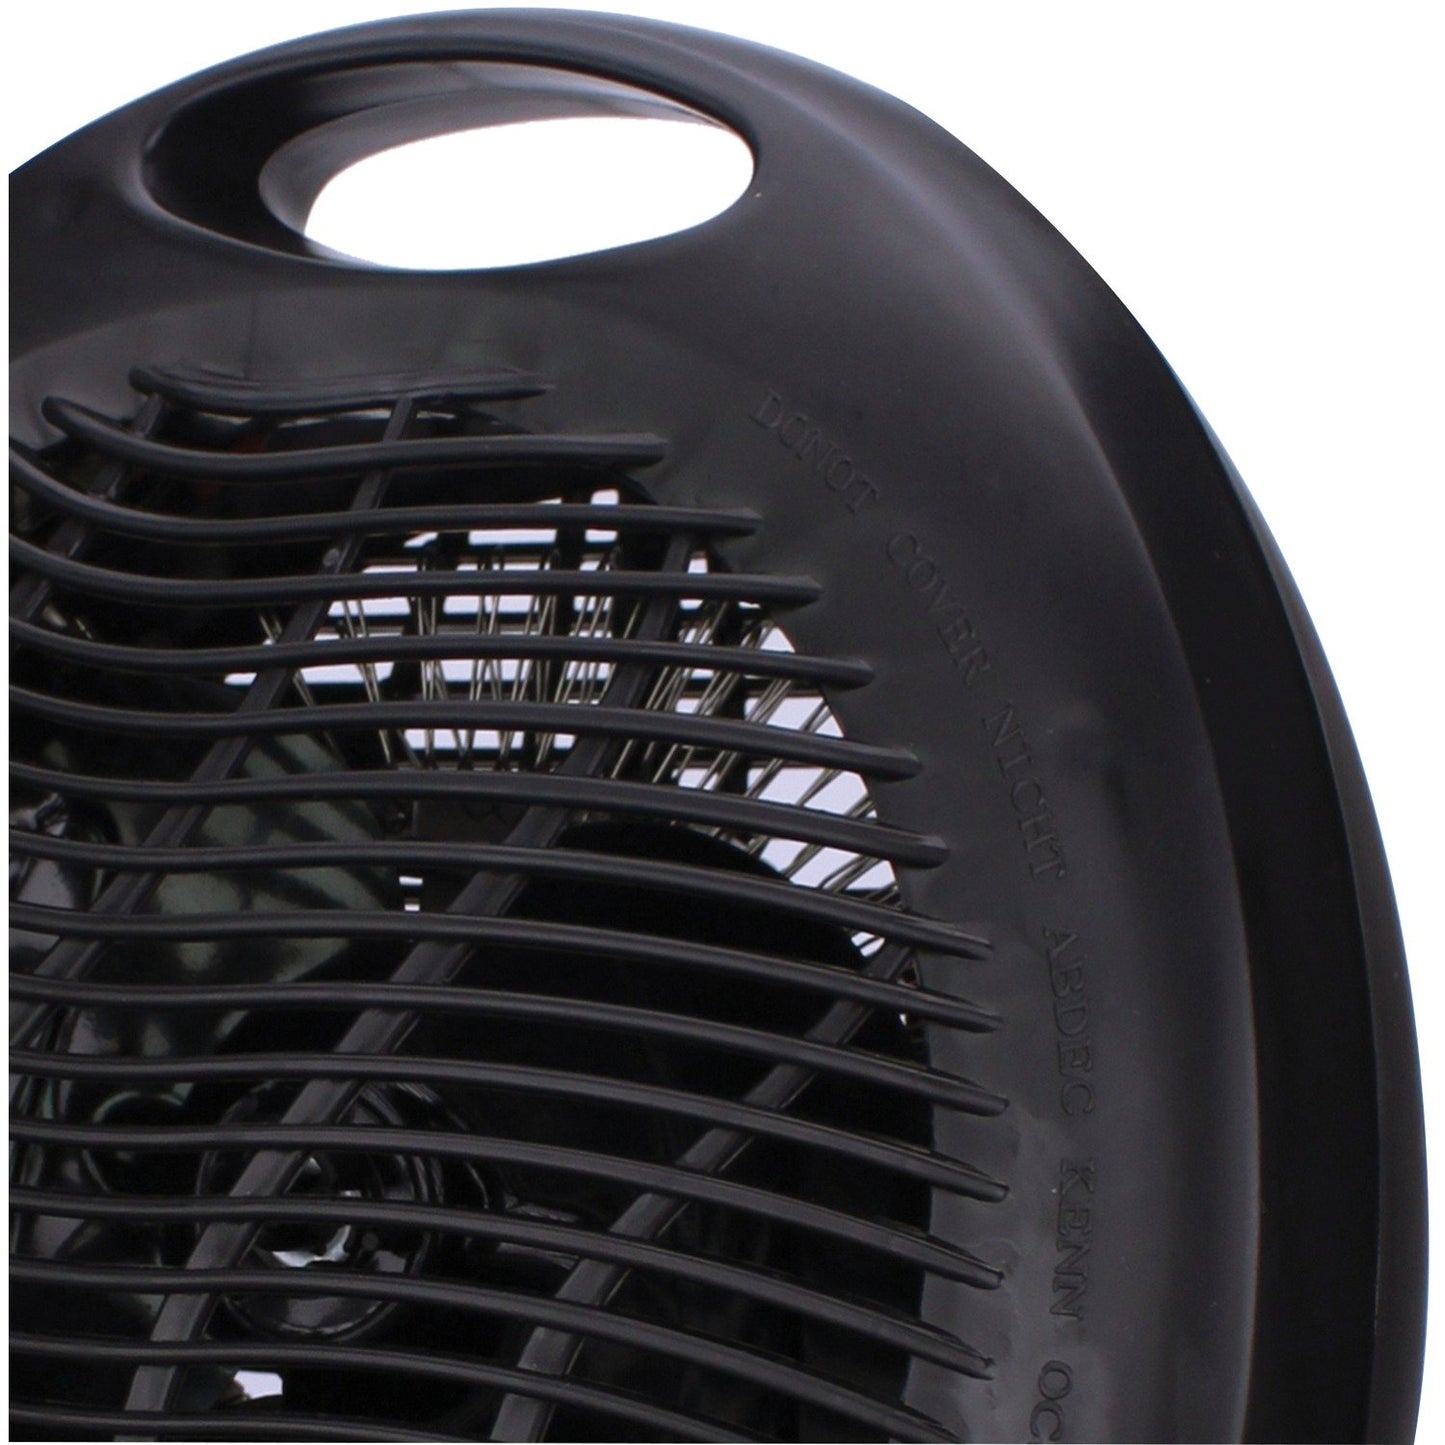 BRENTWOOD H-F301BK Portable Electric Space Heater & Fan (Black)